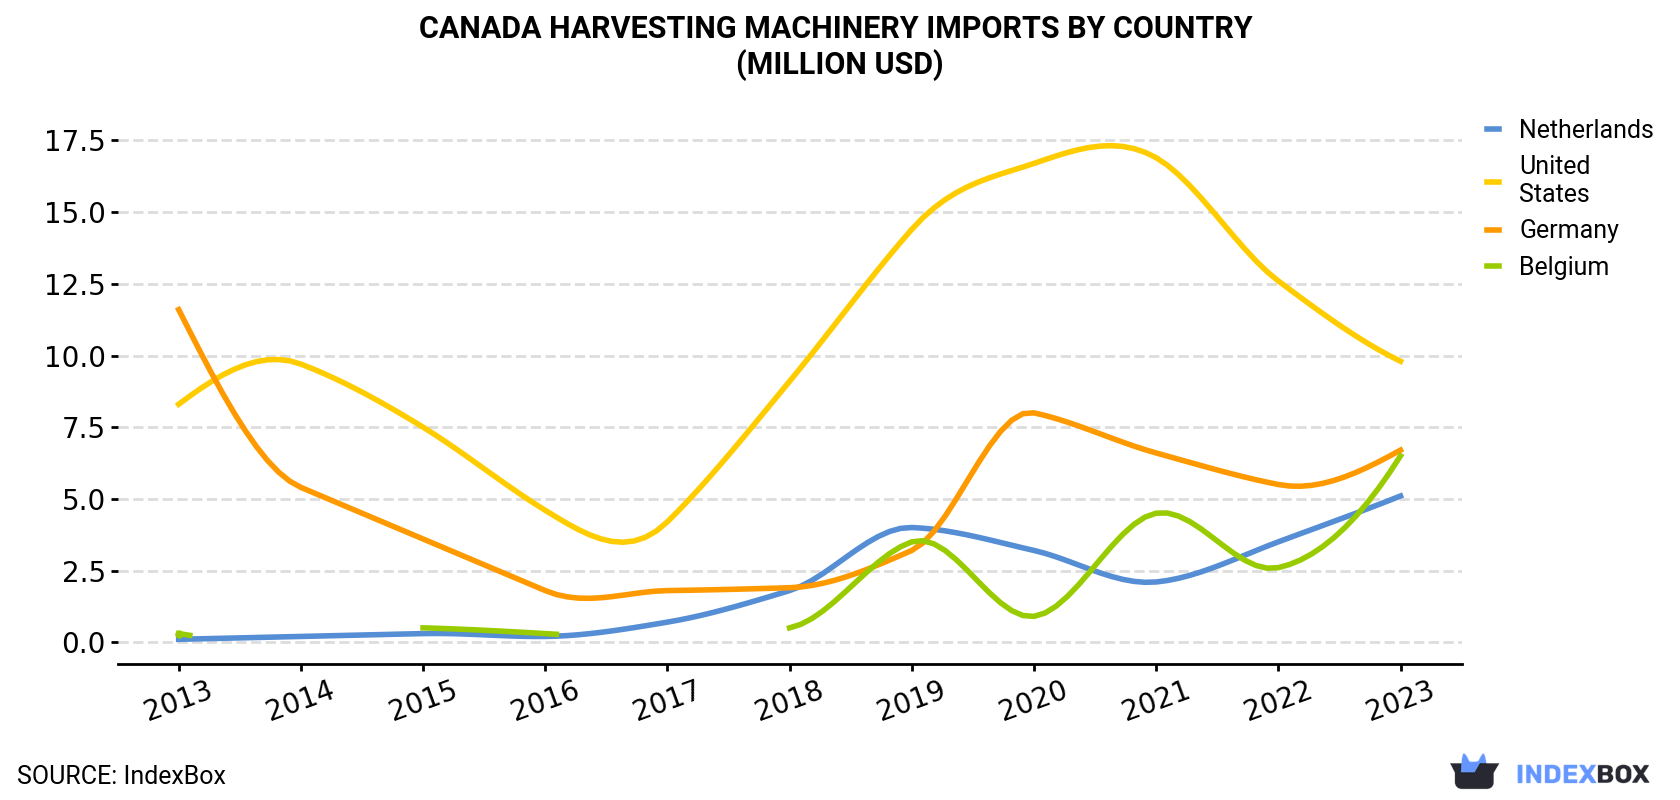 Canada Harvesting Machinery Imports By Country (Million USD)